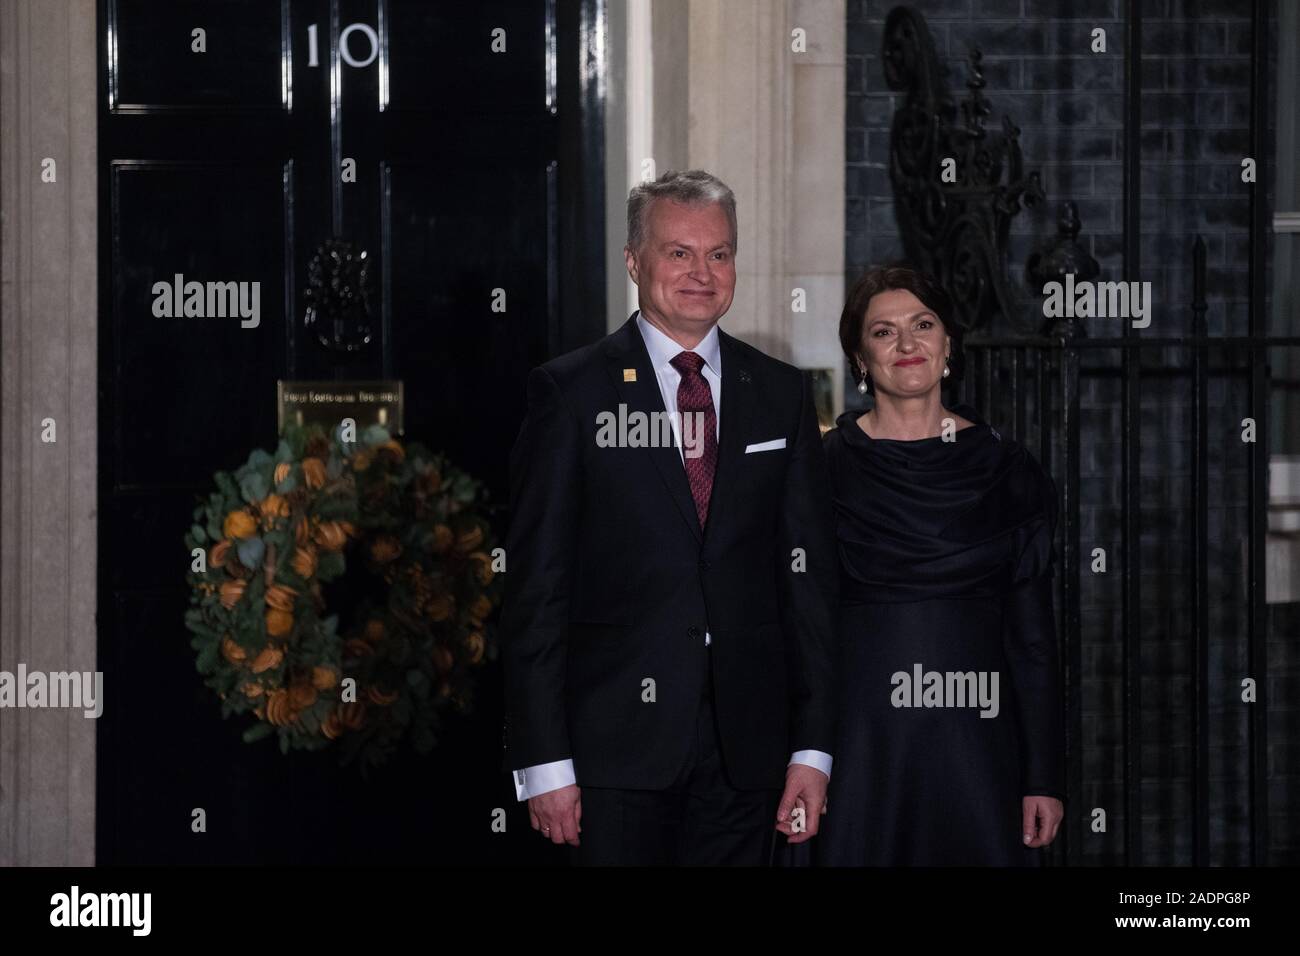 London, UK. 3 December, 2019. Gitanas Nausėda, President of Lithuania, arrives with his wife Diana Nausėdienė for a reception for NATO leaders at 10 Downing Street on the eve of the military alliance’s 70th anniversary summit at a luxury hotel near Watford. Credit: Mark Kerrison/Alamy Live News Stock Photo